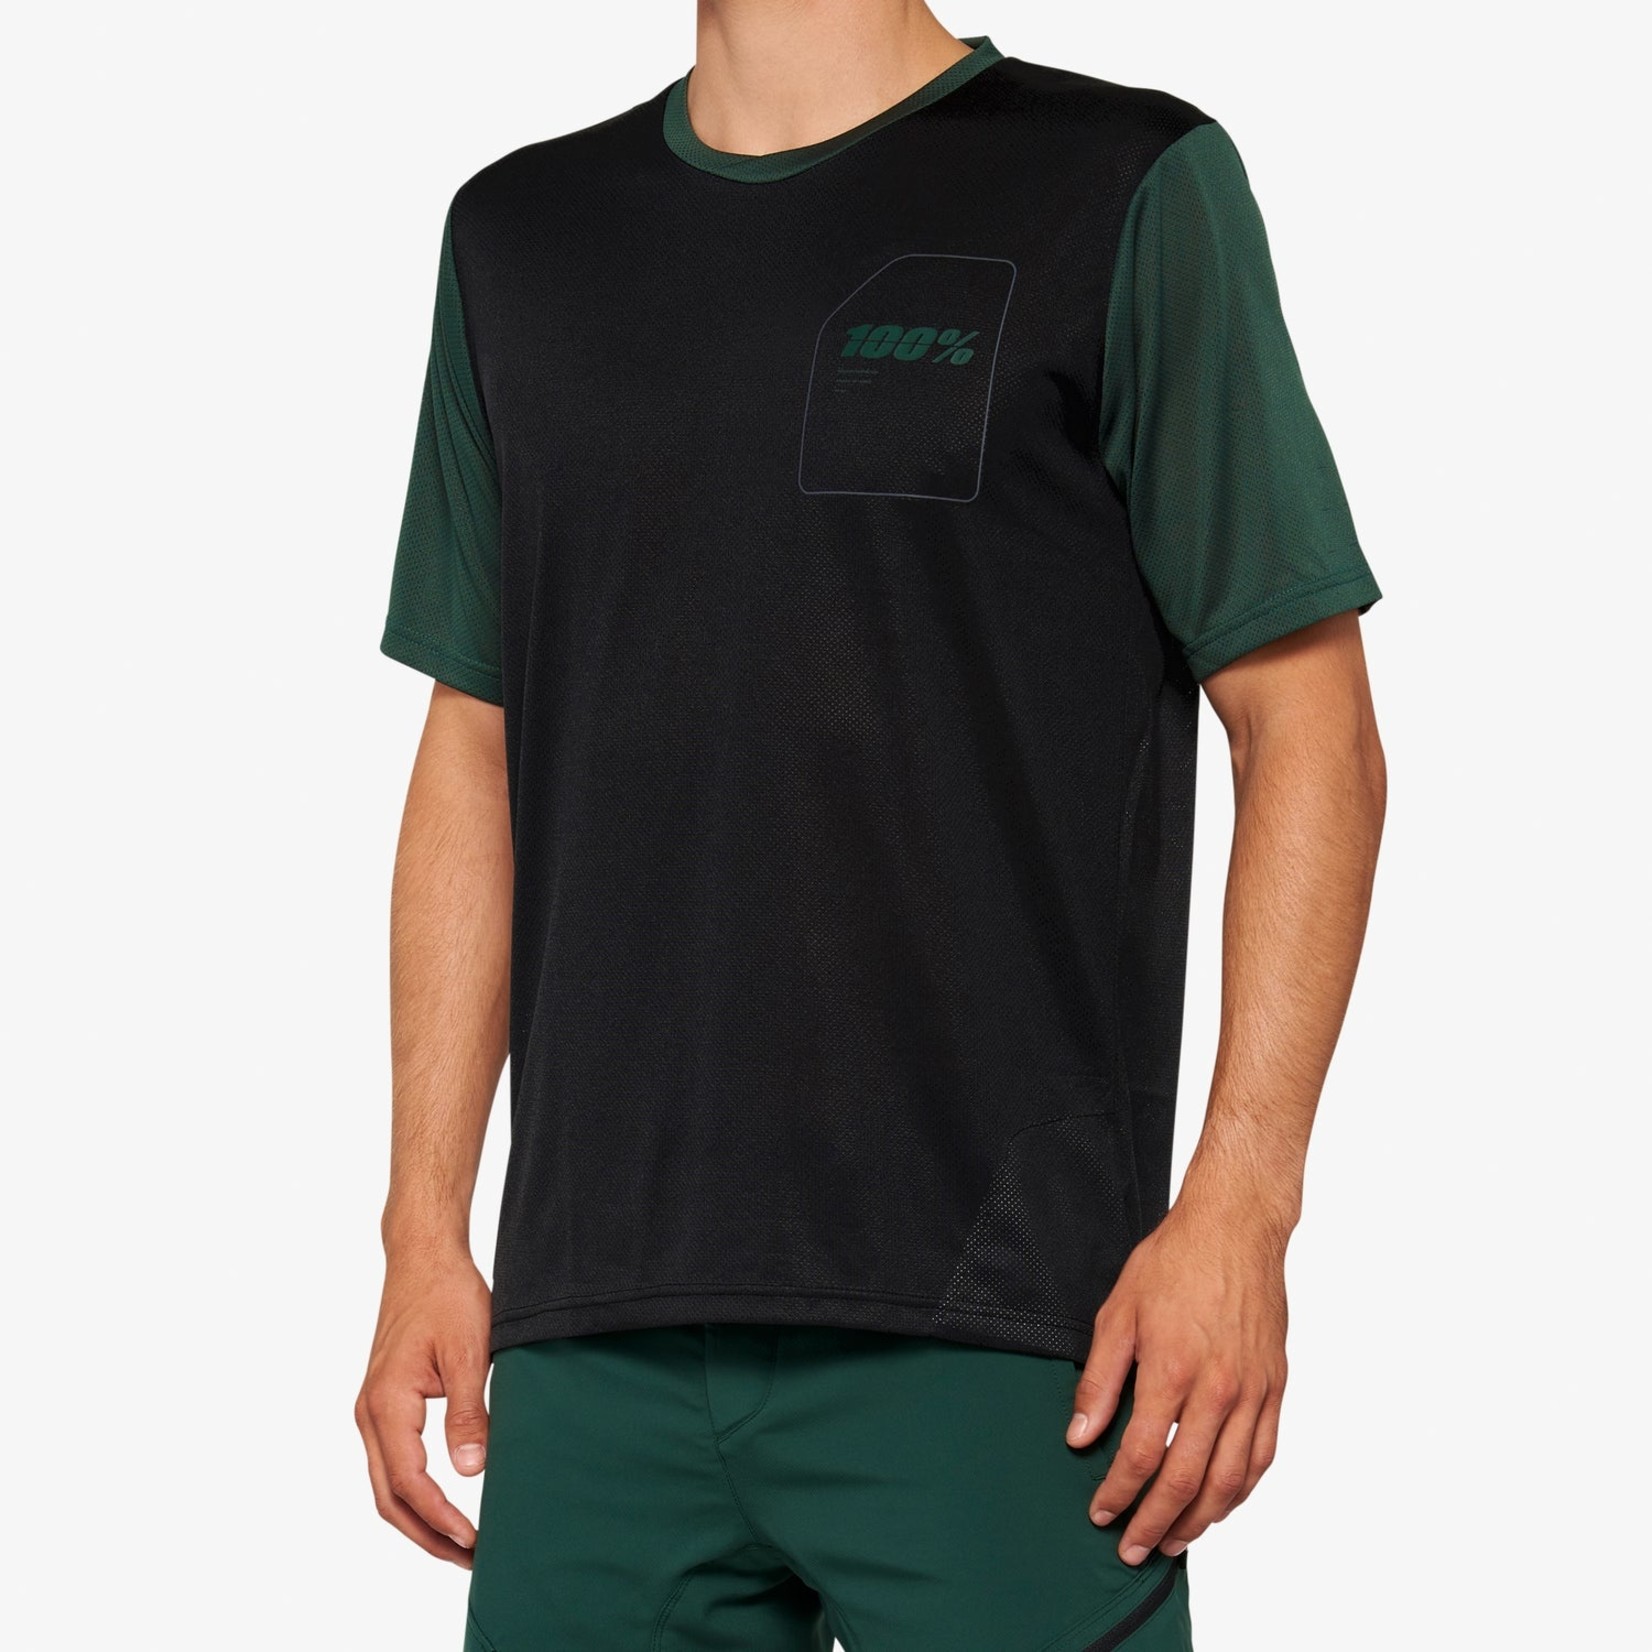 100% Ridecamp All Mountain Short Sleeve Jersey